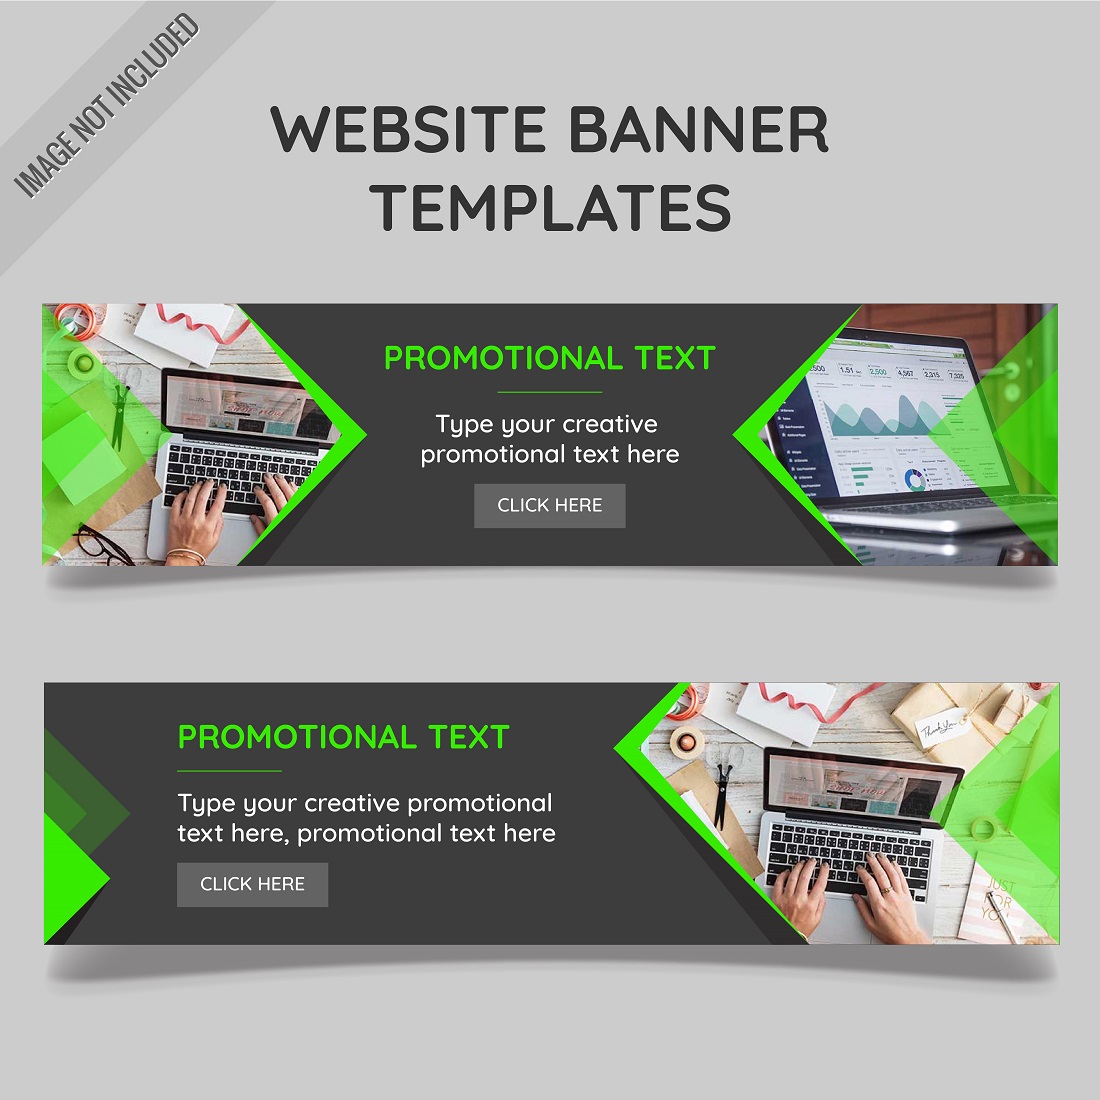 Website banner templates preview image.